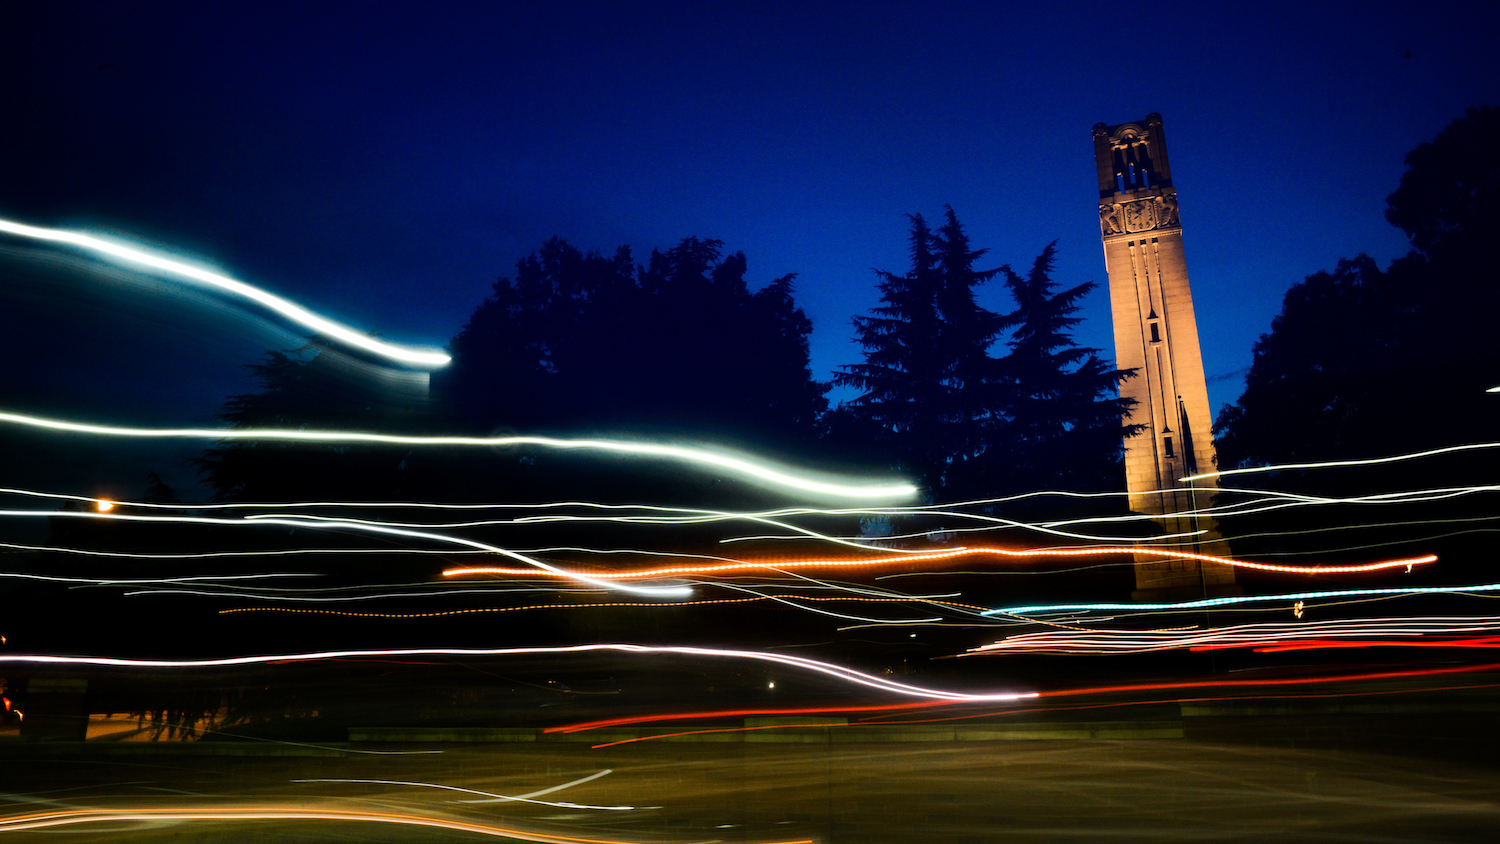 The NC State Belltower at dusk and night. Photo by Marc Hall